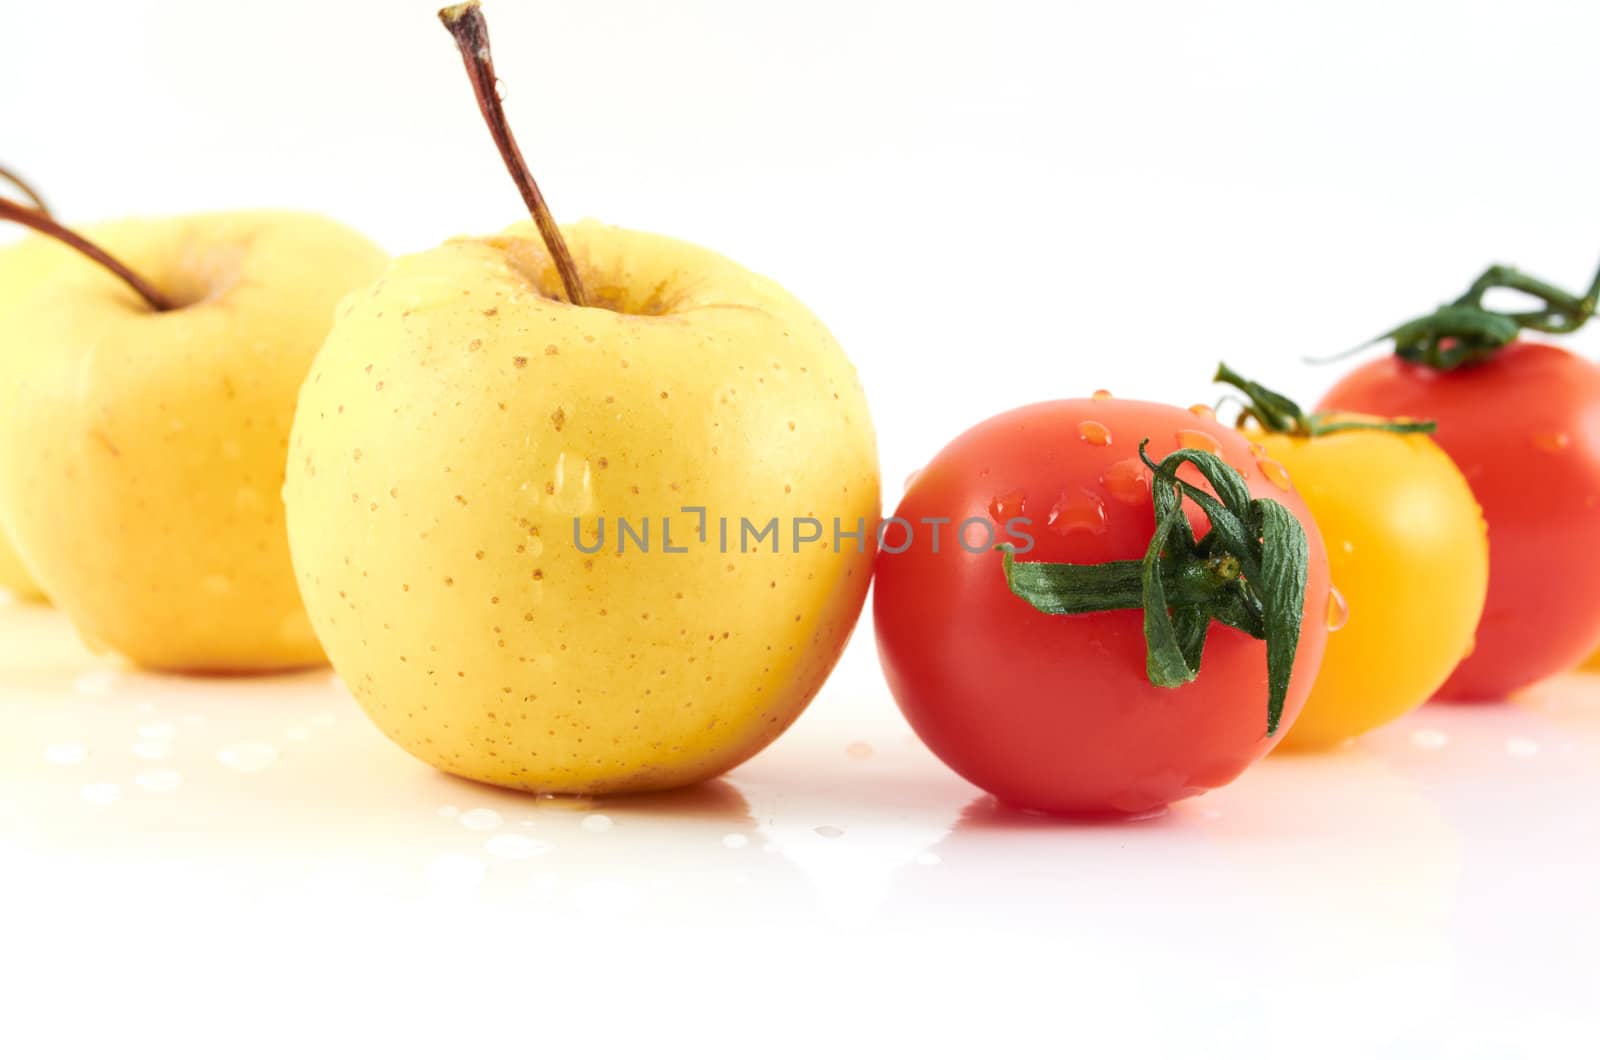 Juicy apples and tomatos by subos